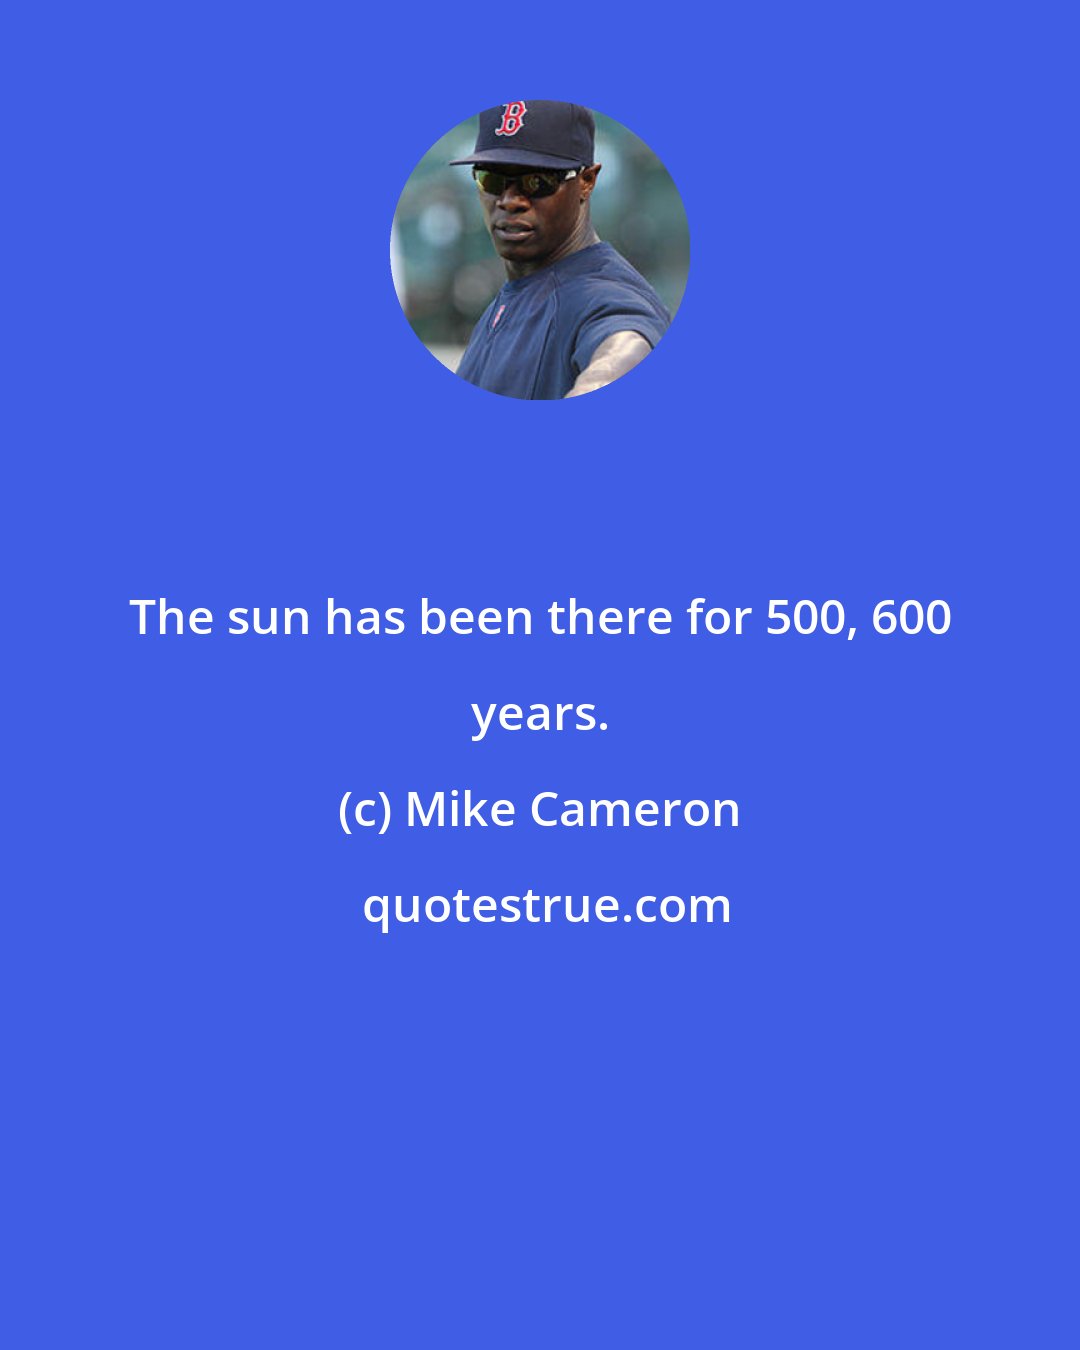 Mike Cameron: The sun has been there for 500, 600 years.